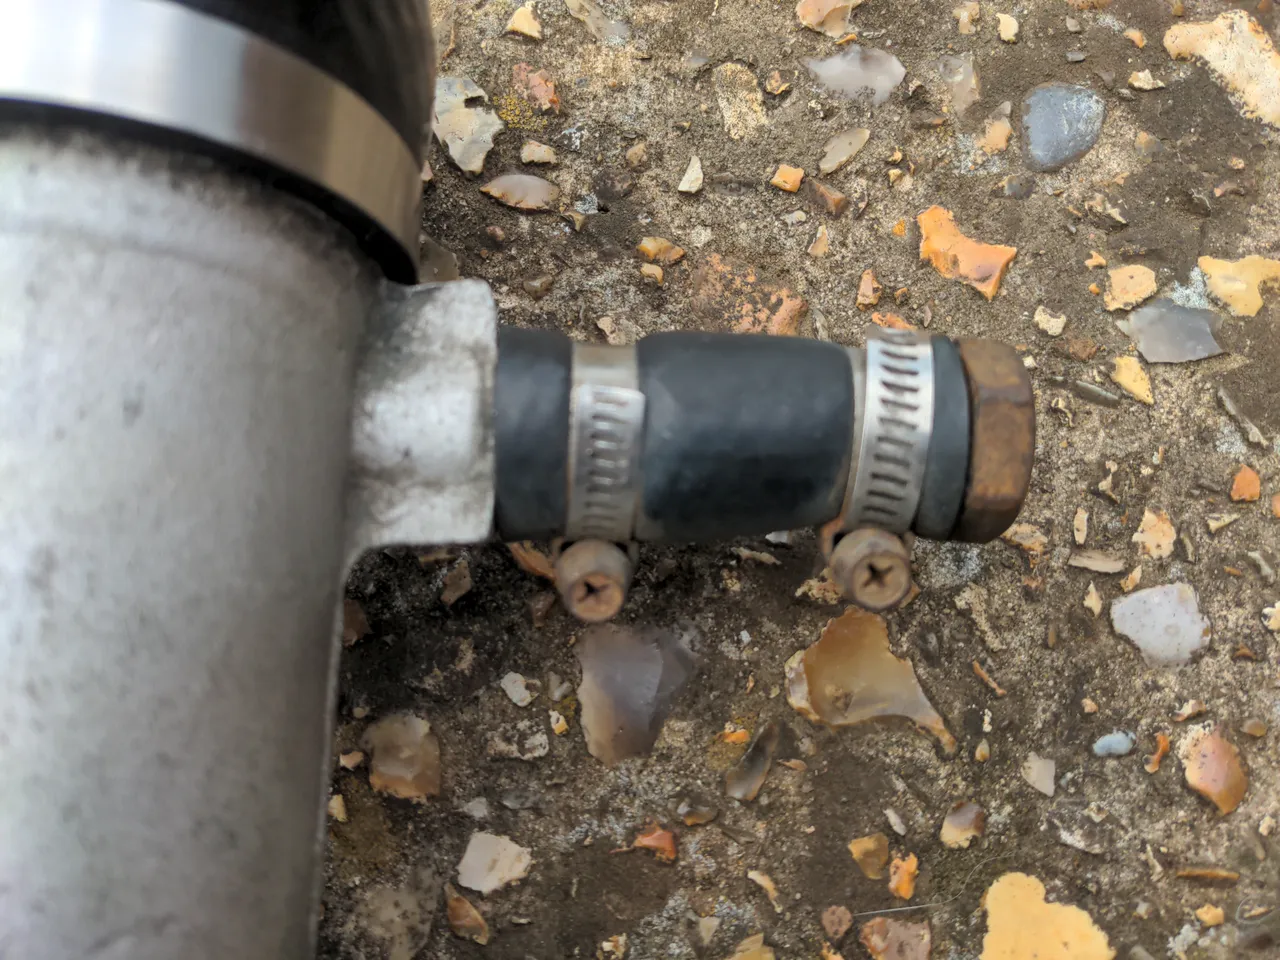 A stub of pipe blanked off by clamping a hose over it, then clamping a bolt into the other end